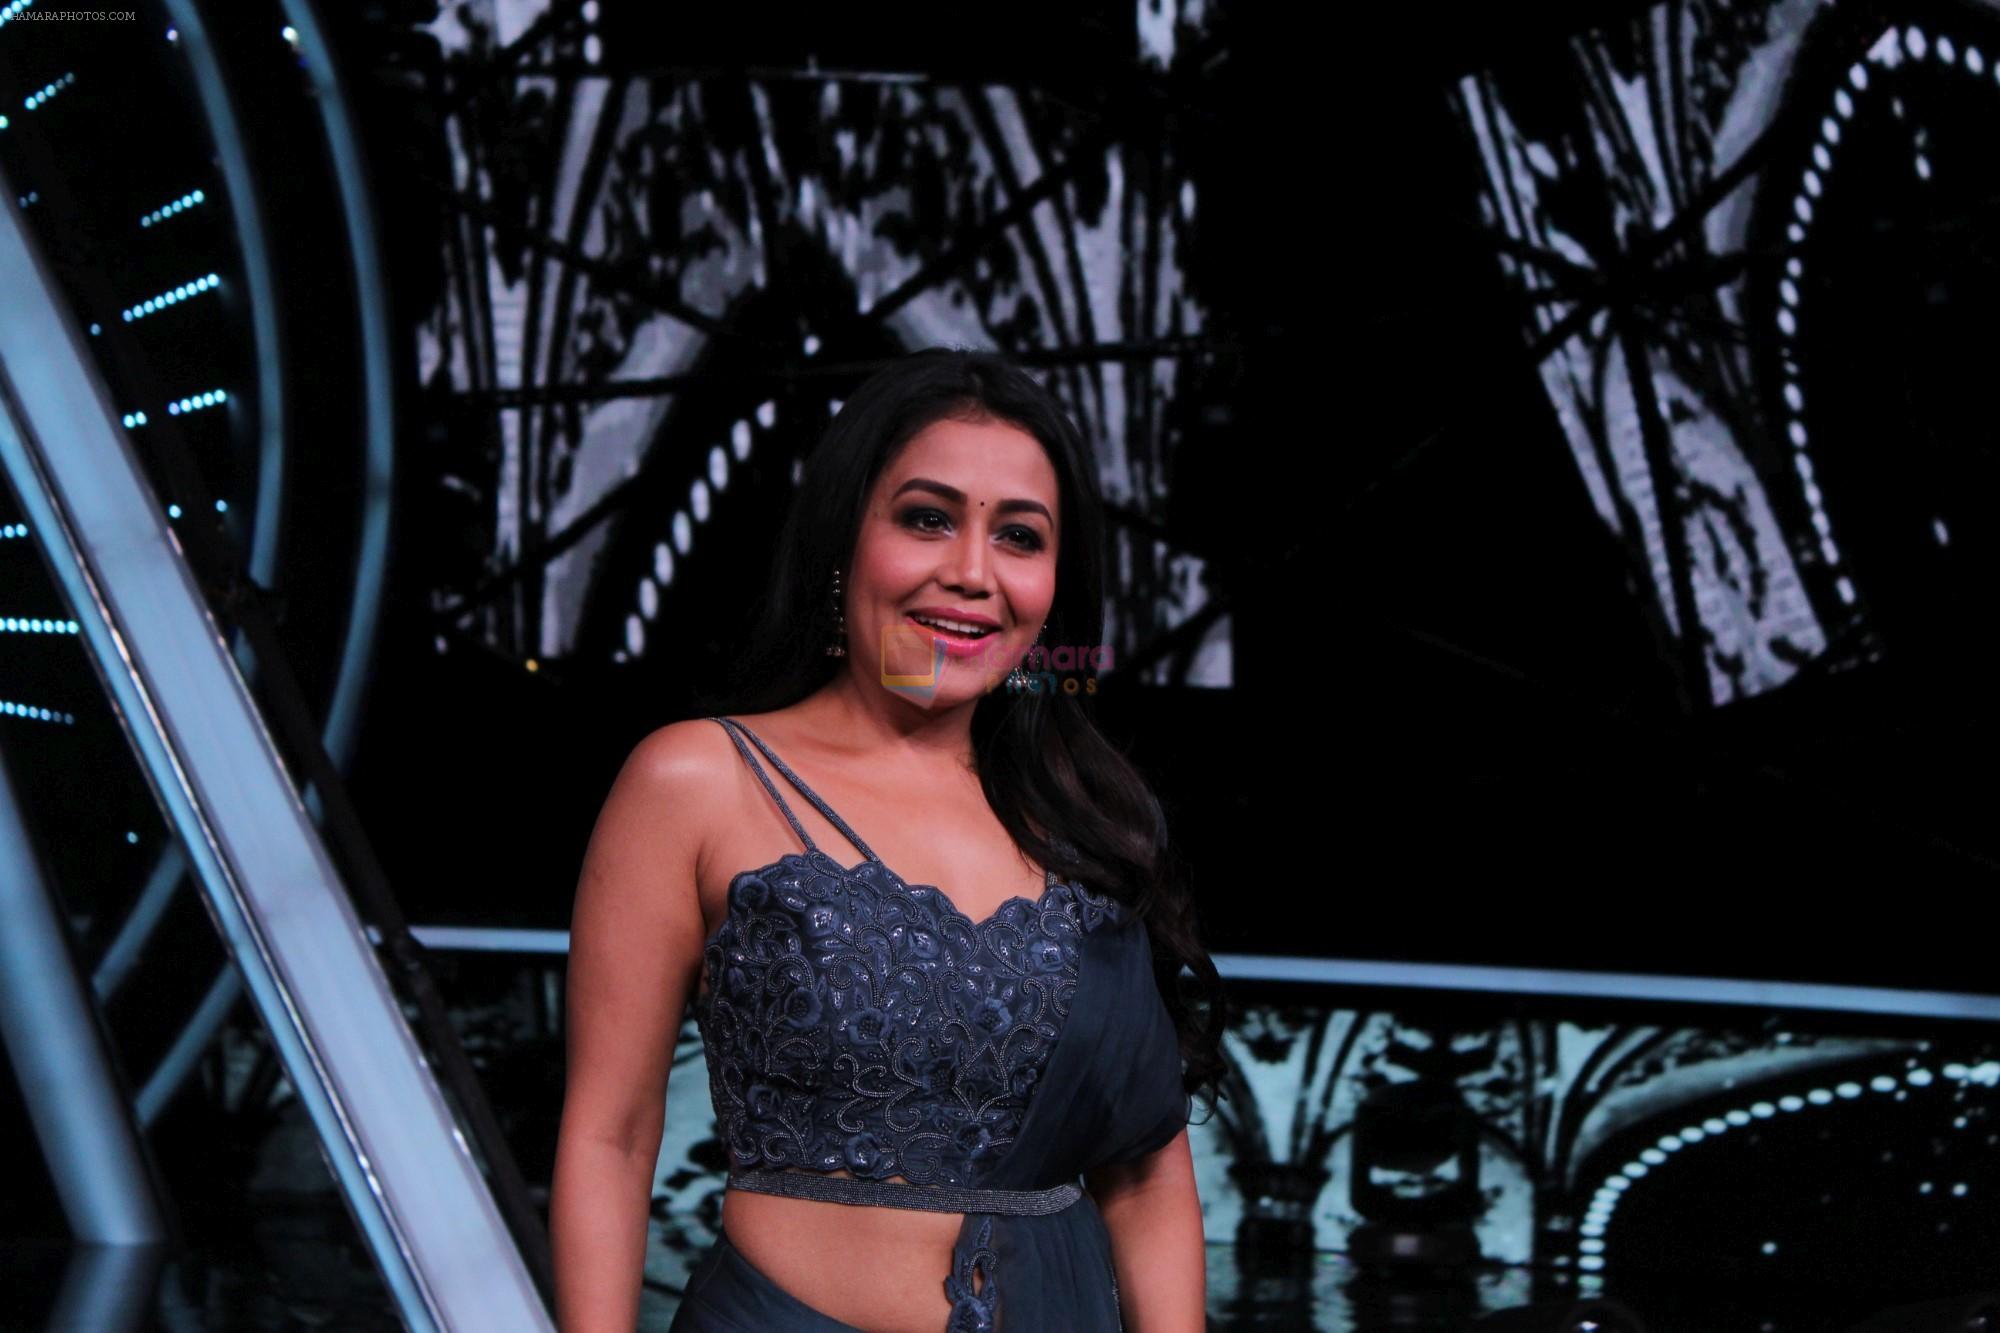 Neha Kakkar at Indian Idol Session 10 for Shoot Special Episode on 5th Dec 2018